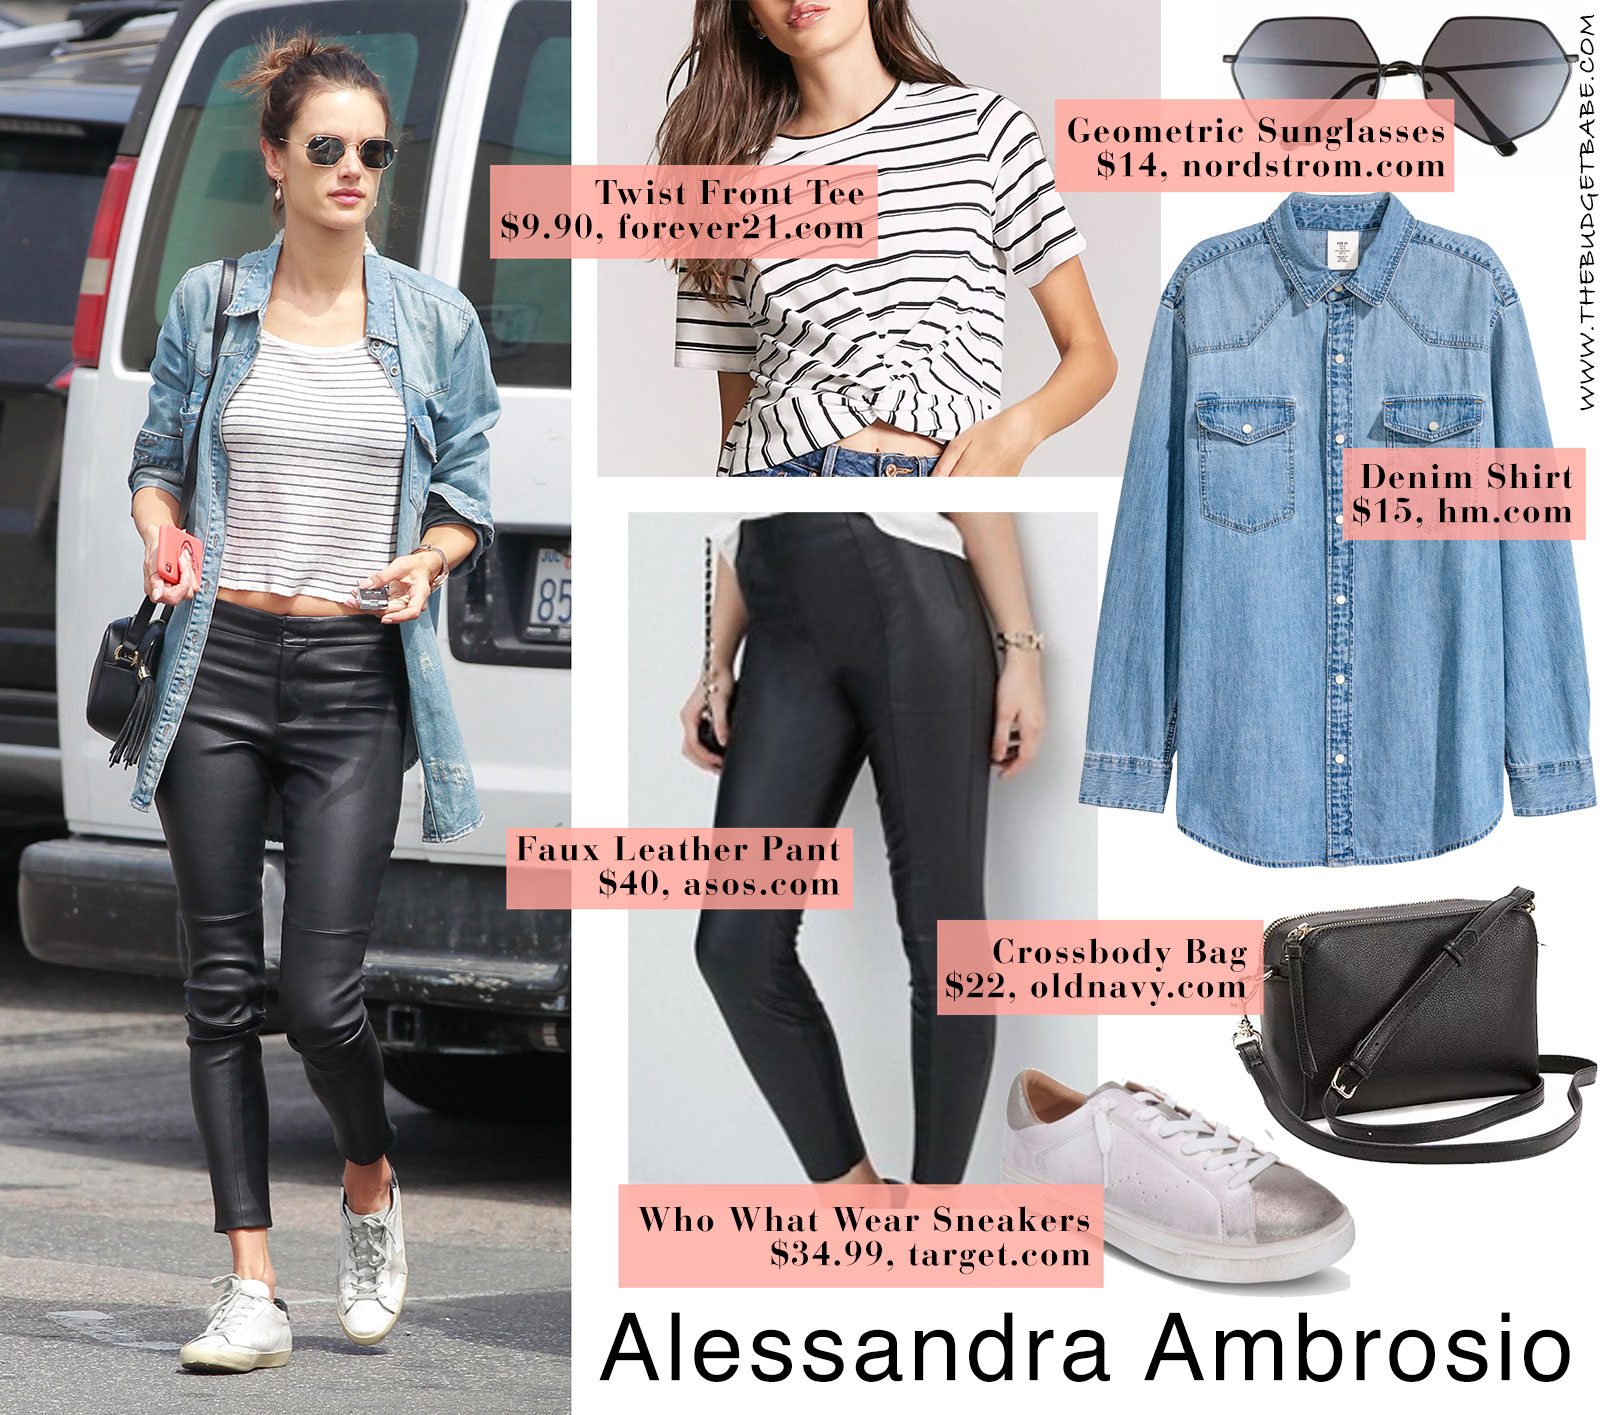 Alessandra Ambrosio's denim shirt and leather leggings look for less